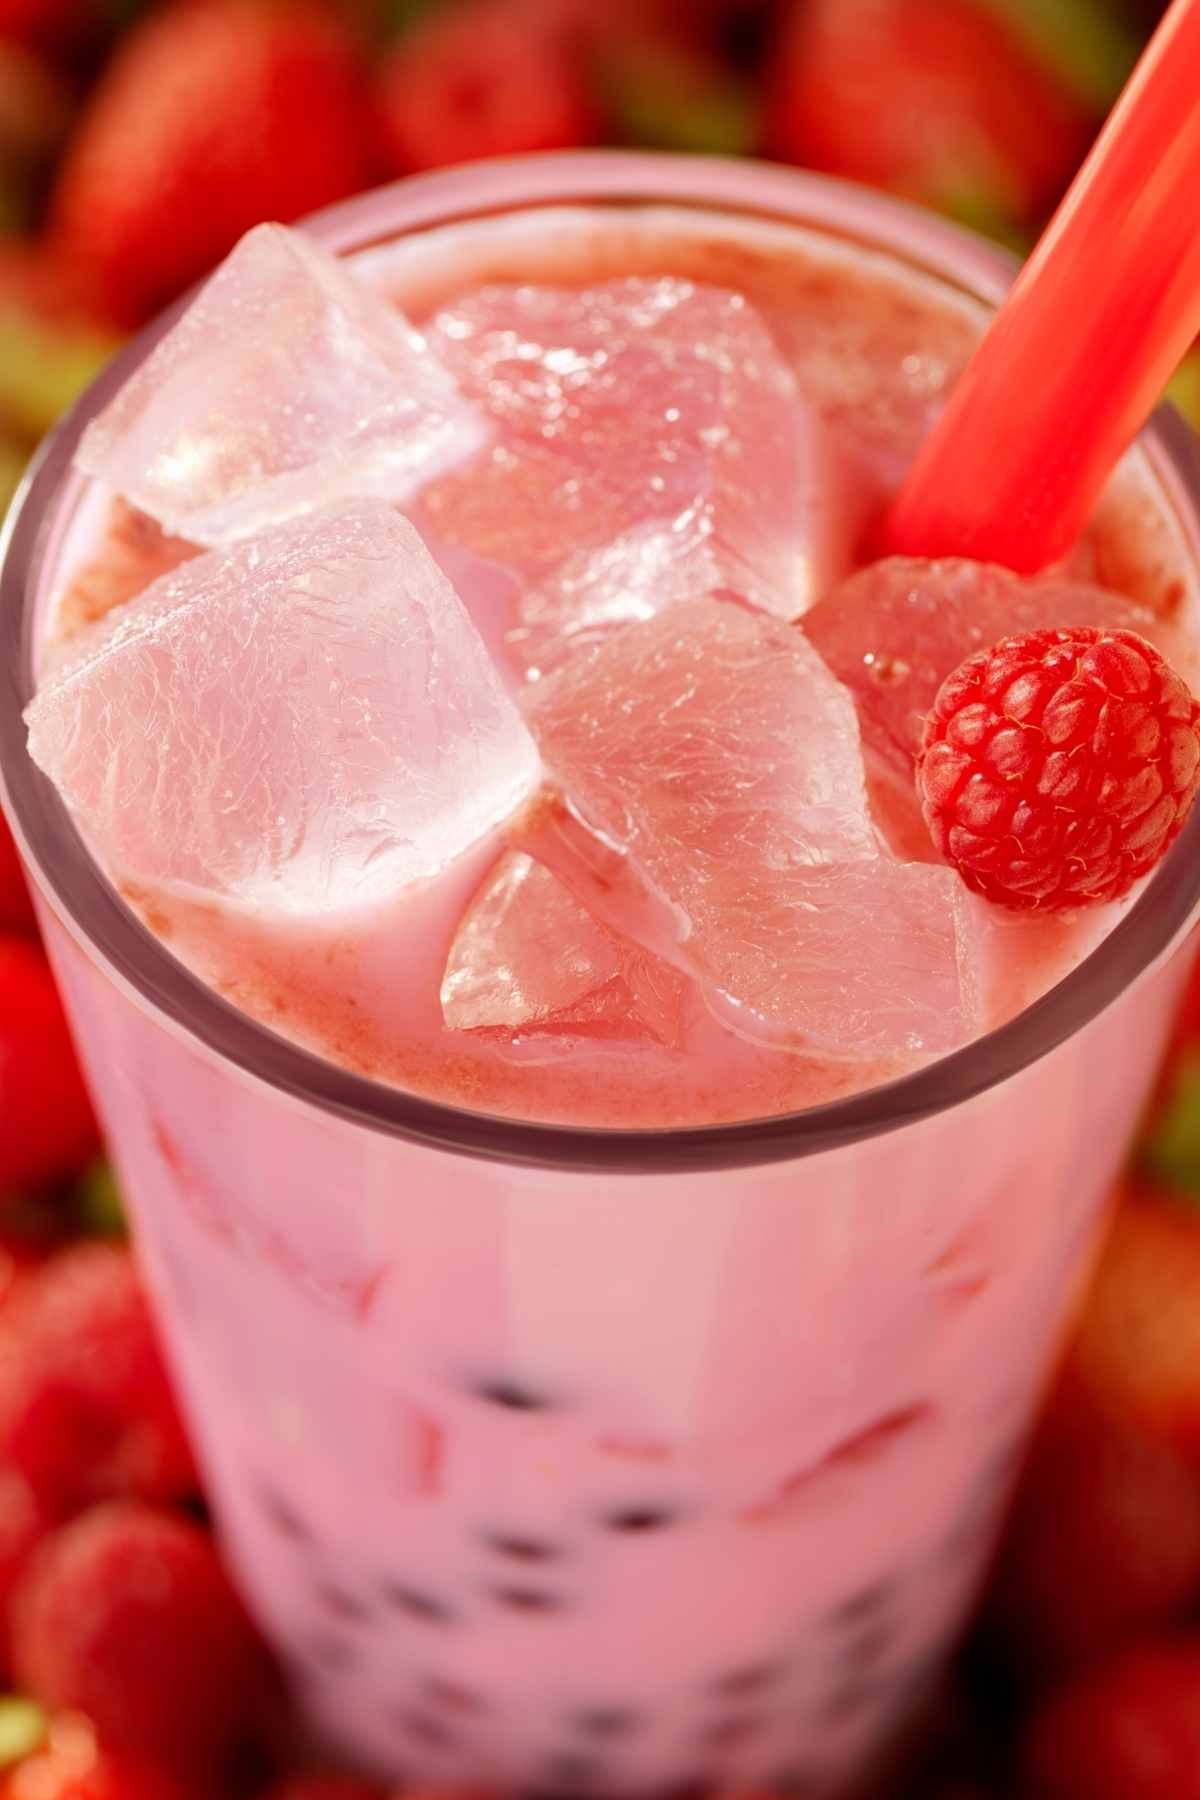 This easy recipe results in a delicious and flavorful drink or dessert your family will love. Whether you enjoy it after dinner or first thing as a fruity breakfast snack in summer, this Strawberry Boba will soon become part of your favorite treat.